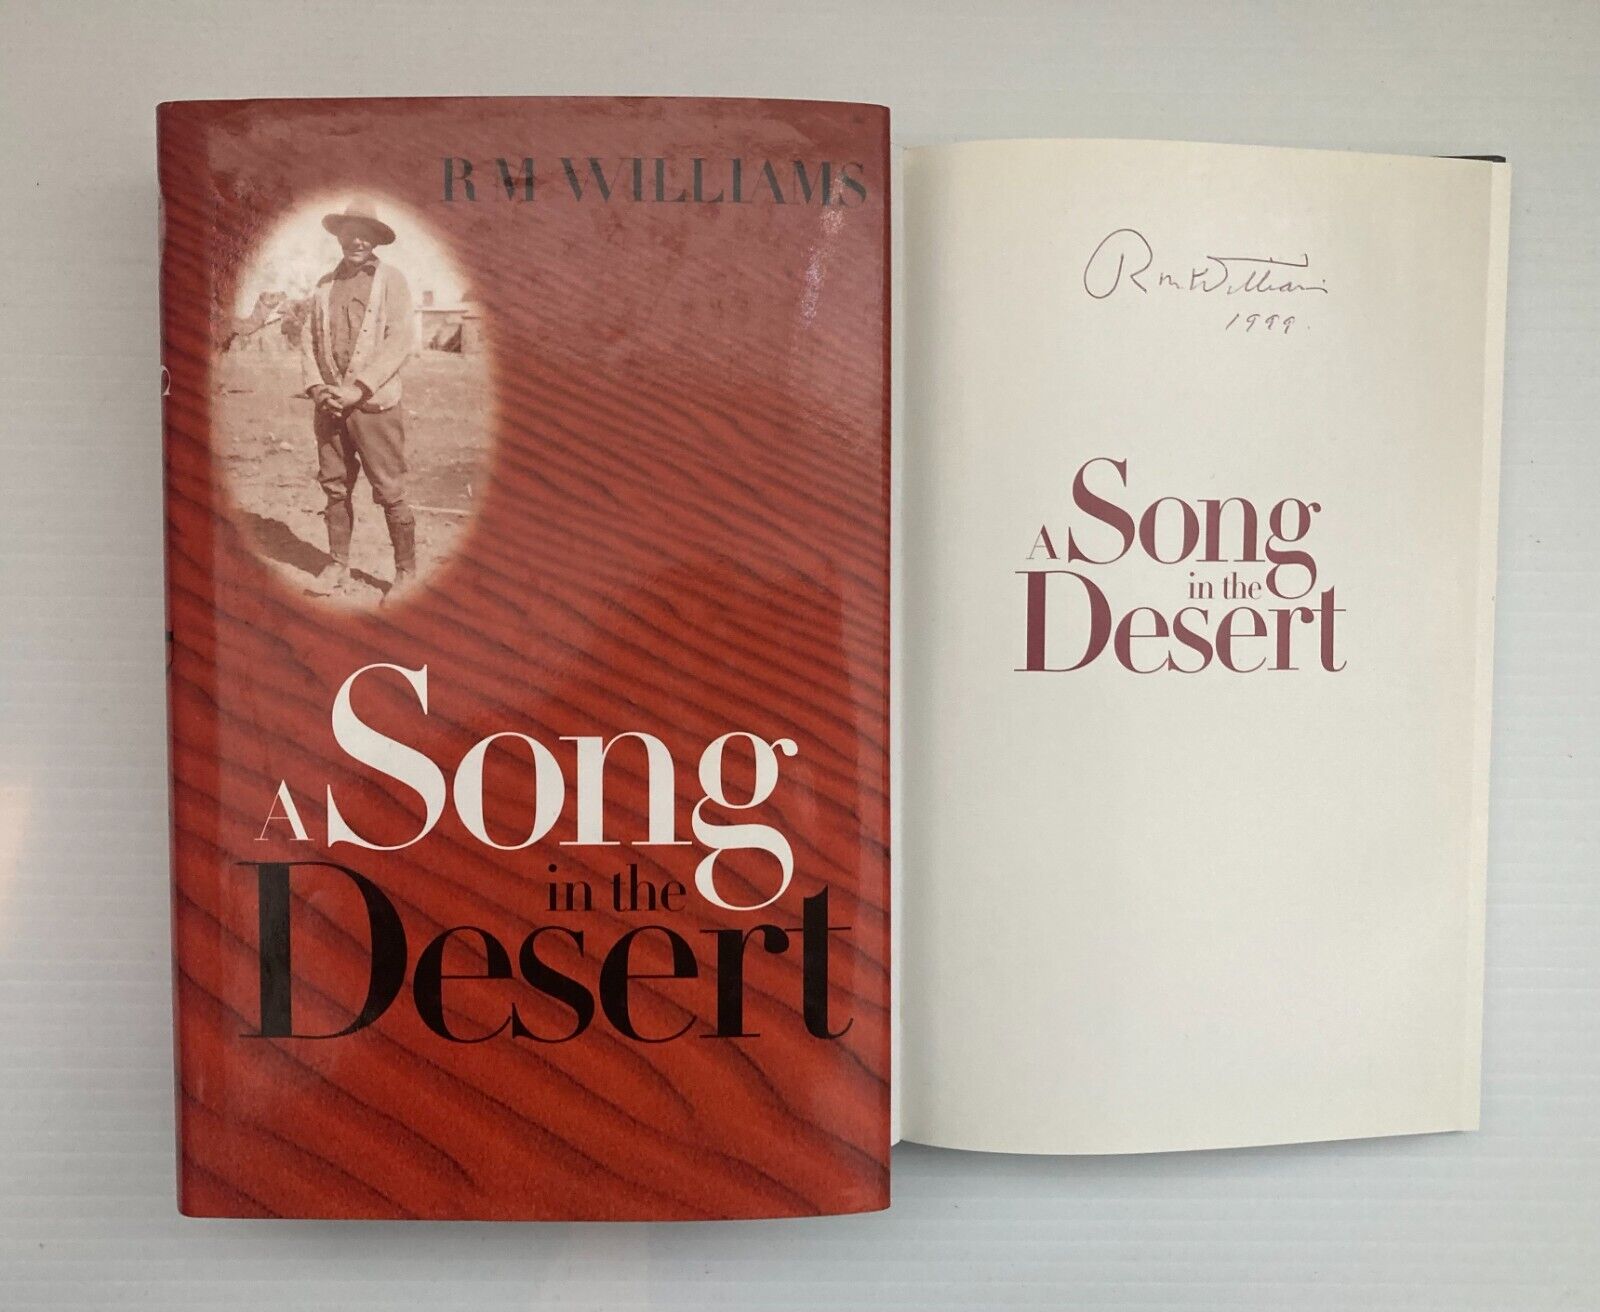 R M WILLIAMS A SONG IN THE DESERT RARE SIGNED BOOK COA